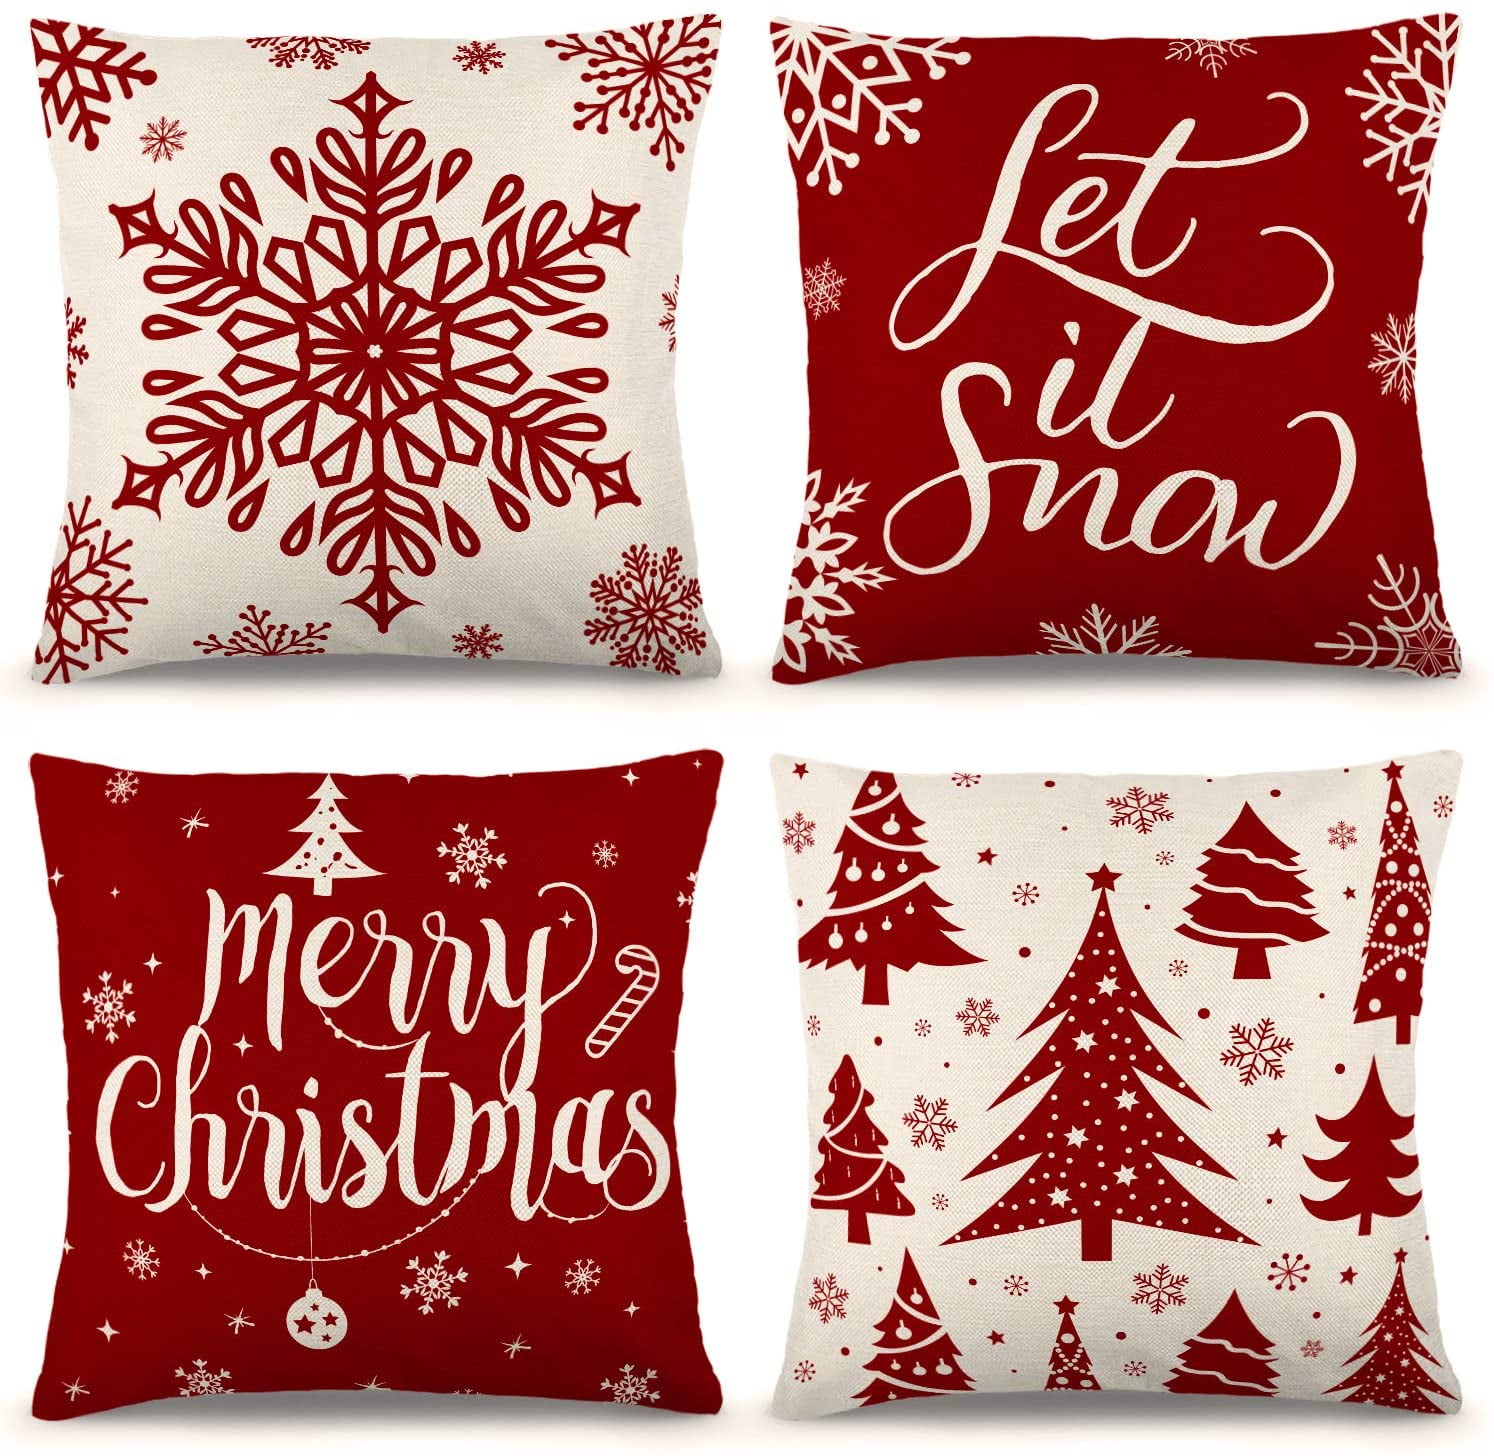 axsl Big Red Snowflakes Pillow Cover Christmas Red Farmhouse Throw Pillow Cover Plaid Cuhion Cover Case for Couch Sofa Home Decoration Farm Christmas Pillows Linen 18 X 18 Inches